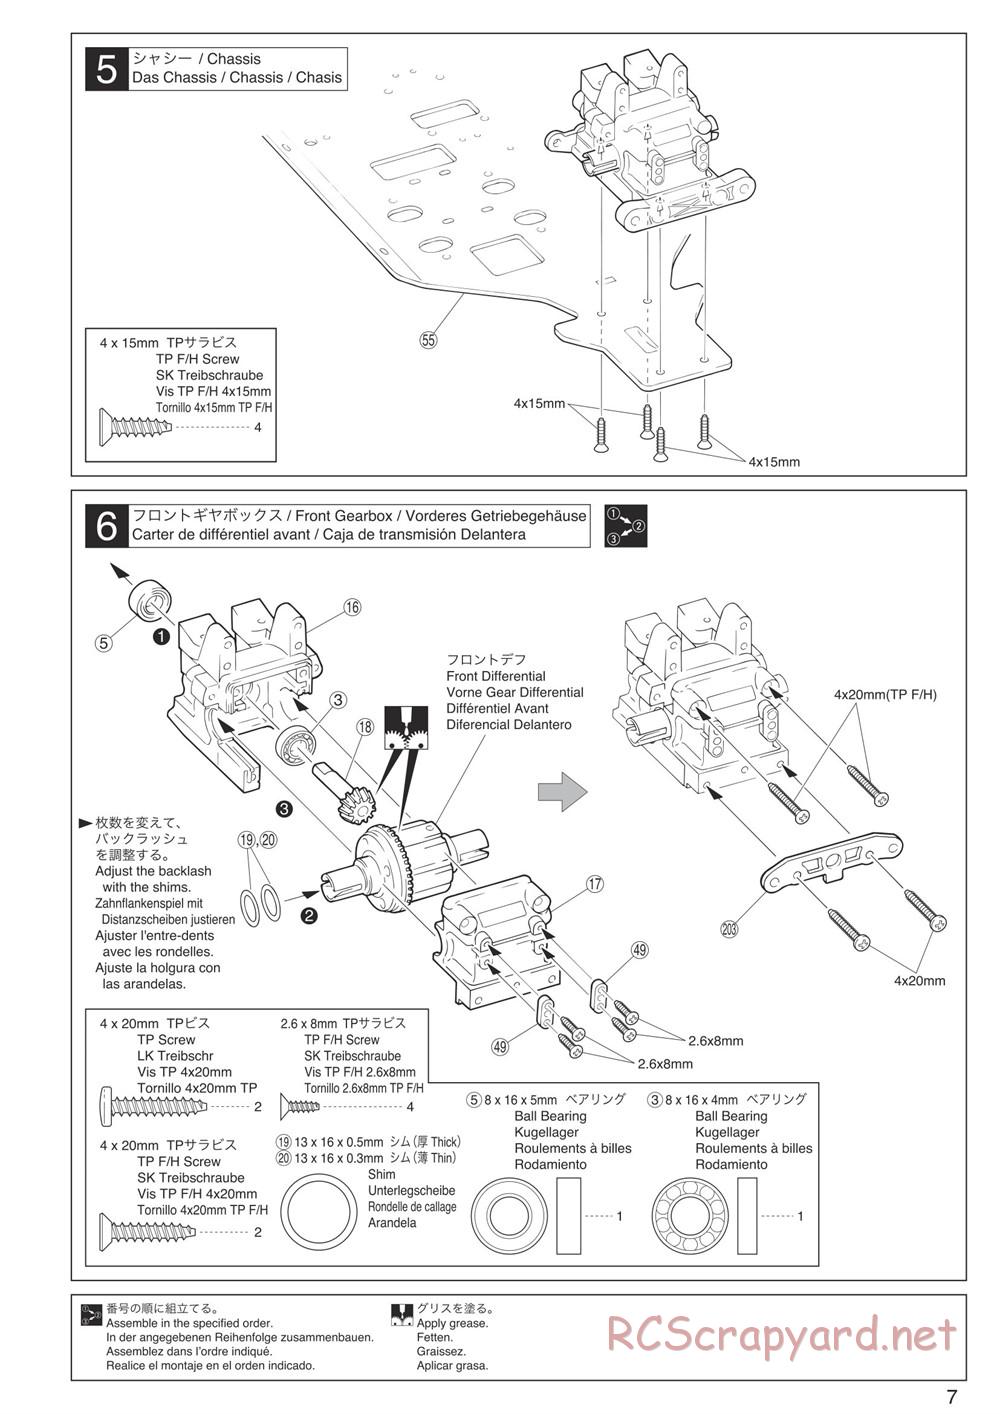 Kyosho - Inferno Neo 3.0 - Manual - Page 7